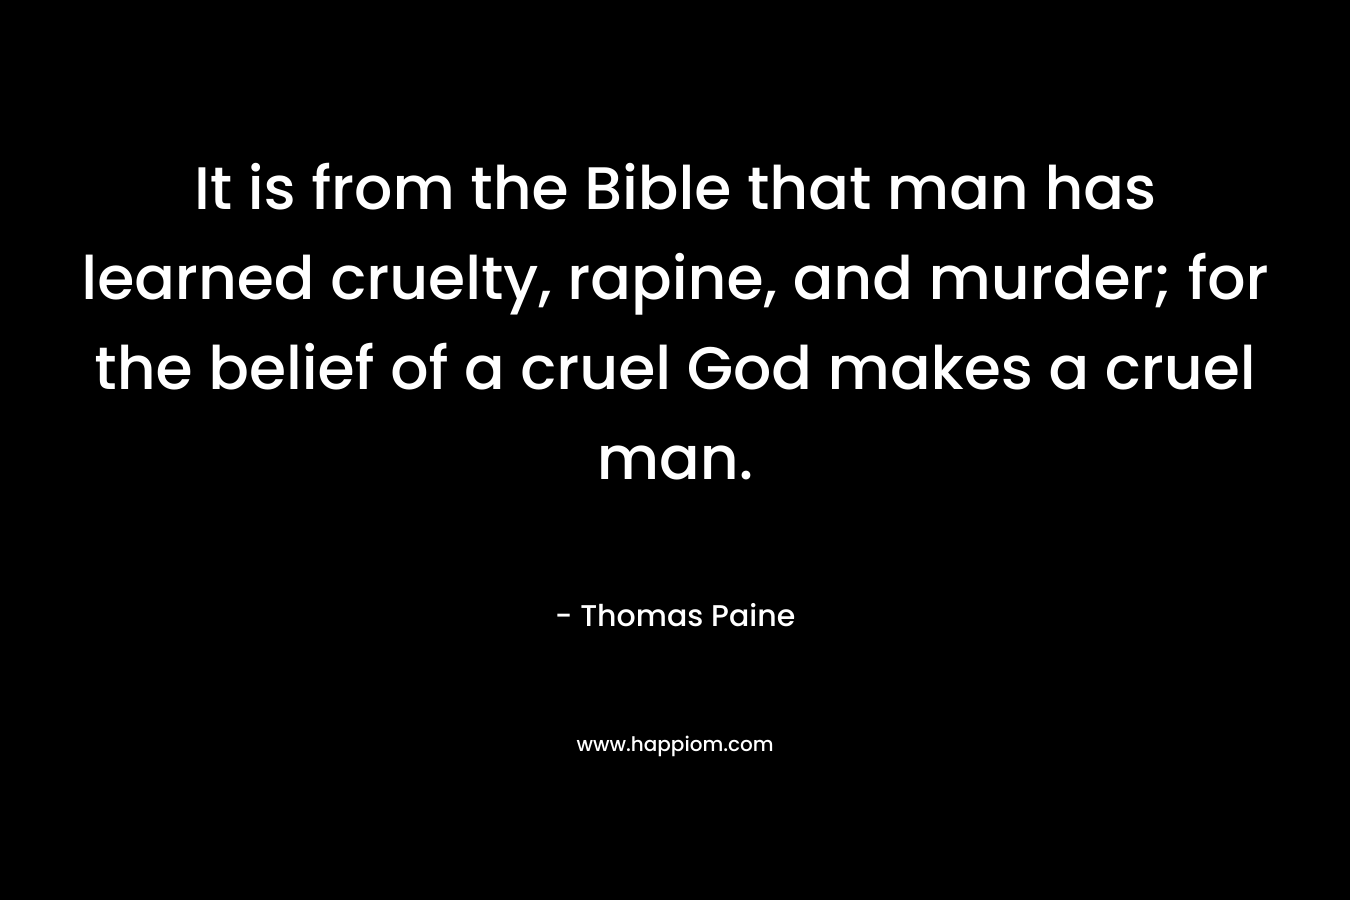 It is from the Bible that man has learned cruelty, rapine, and murder; for the belief of a cruel God makes a cruel man.